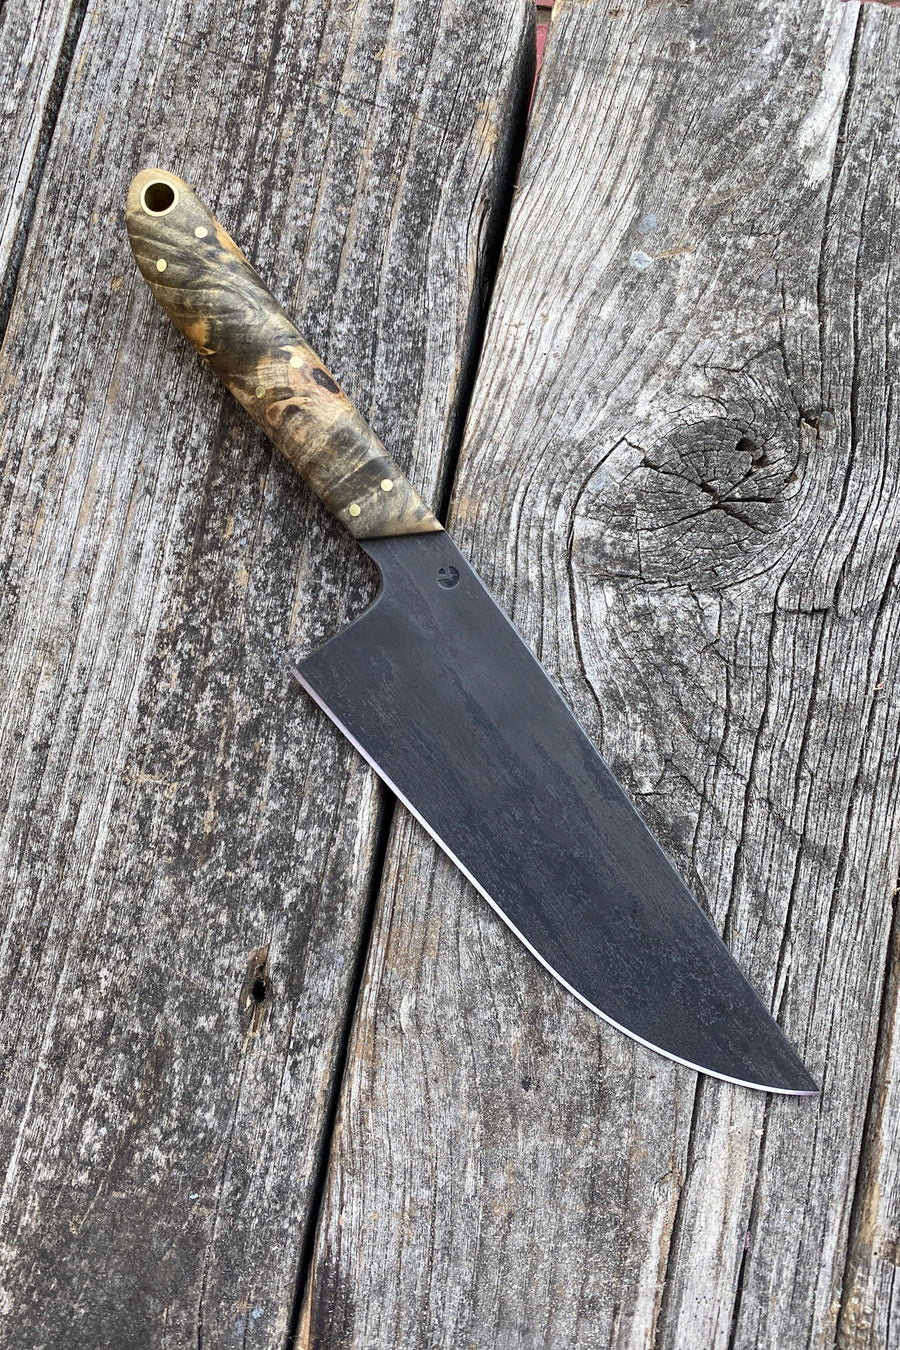 Redroot Blades -- Handmade small chef's knife. Carbon steel and stainless steel kitchen knives.